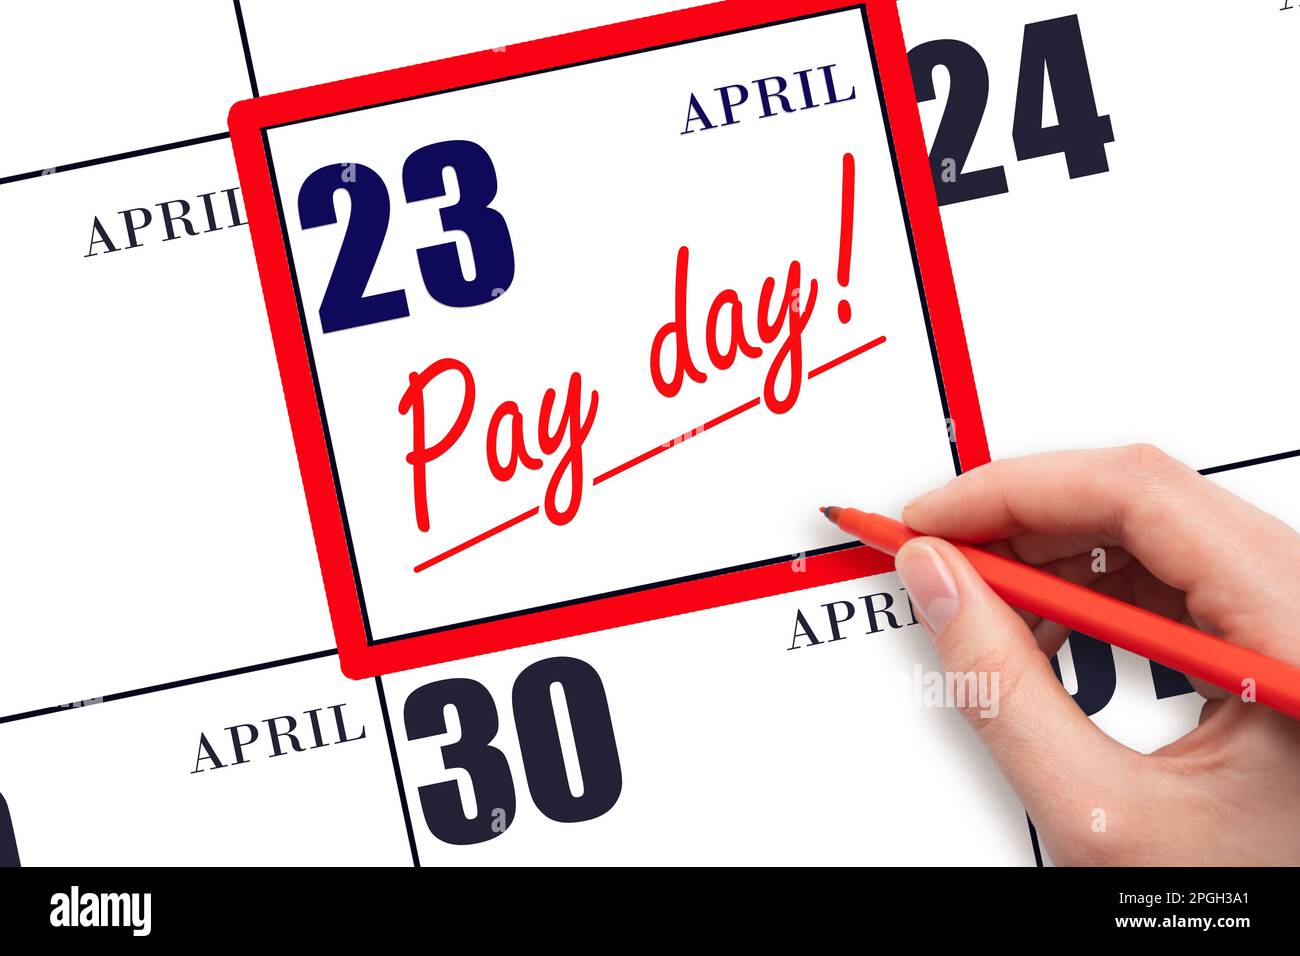 23rd day of April. Hand writing text PAY DATE on calendar date April 23 and underline it. Payment due date. Reminder concept of payment. Spring month, Stock Photo